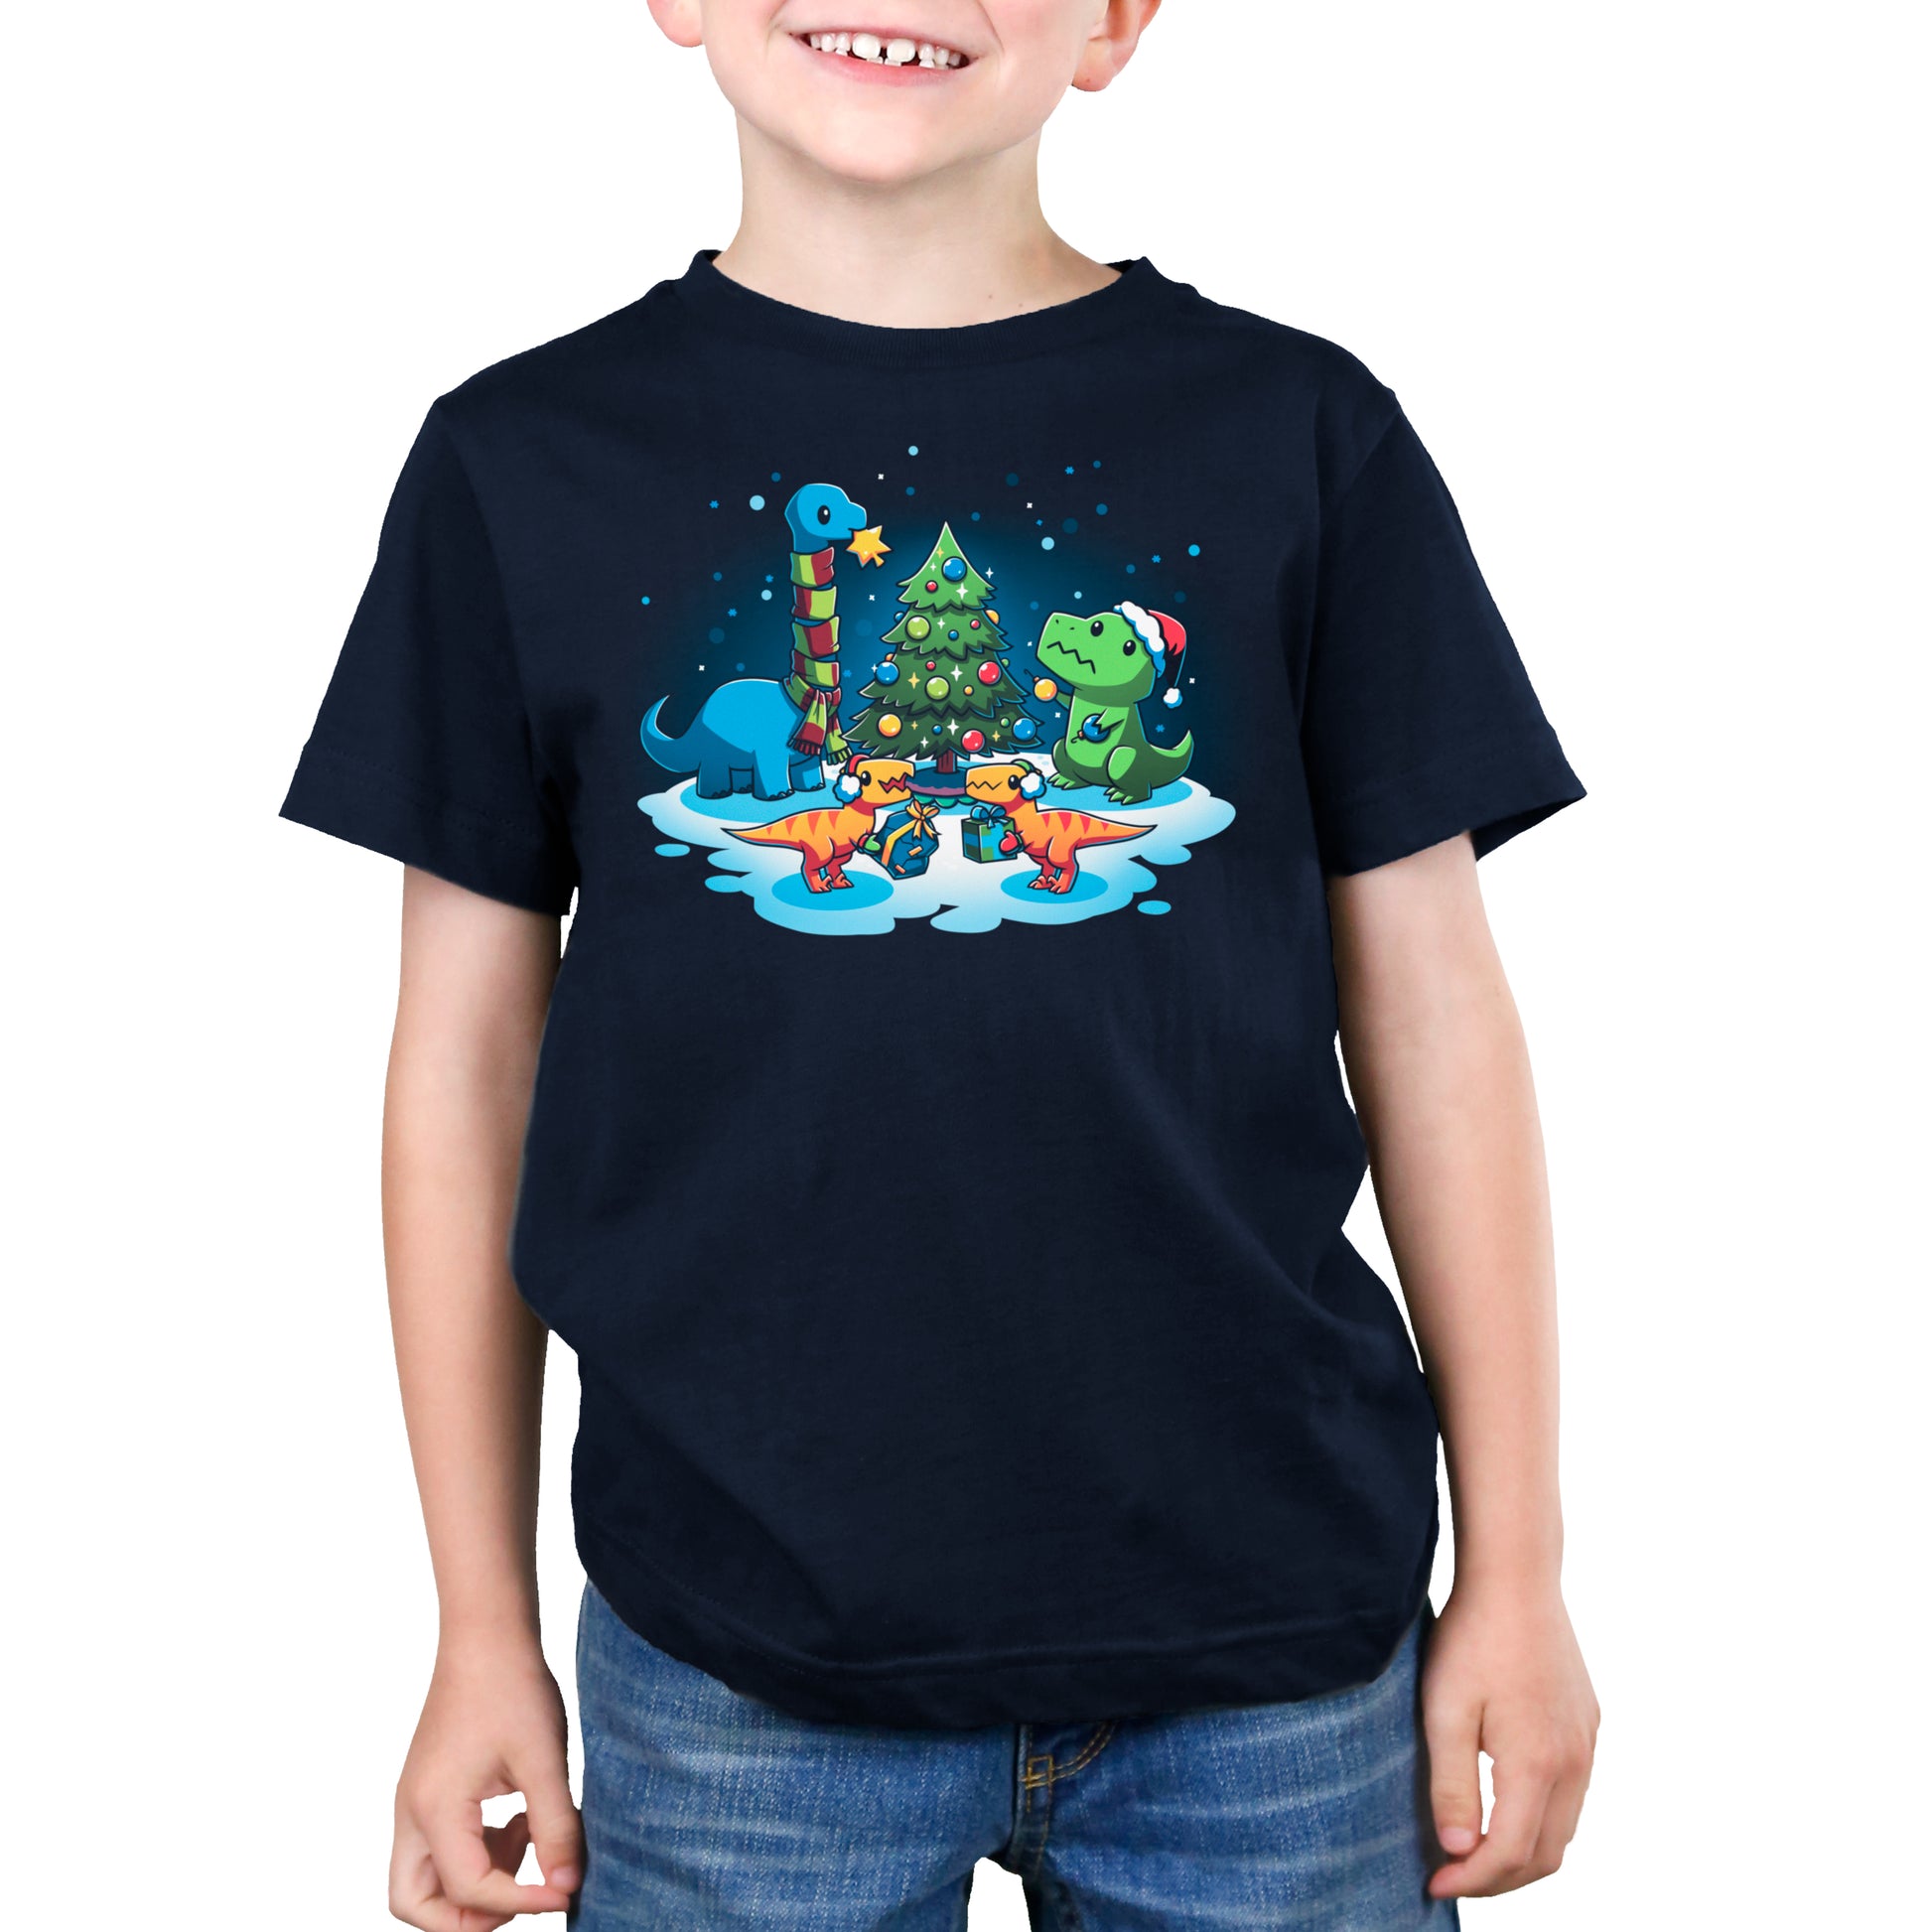 A boy wearing a "A Very Dino Christmas" t-shirt by TeeTurtle, receiving a gift.